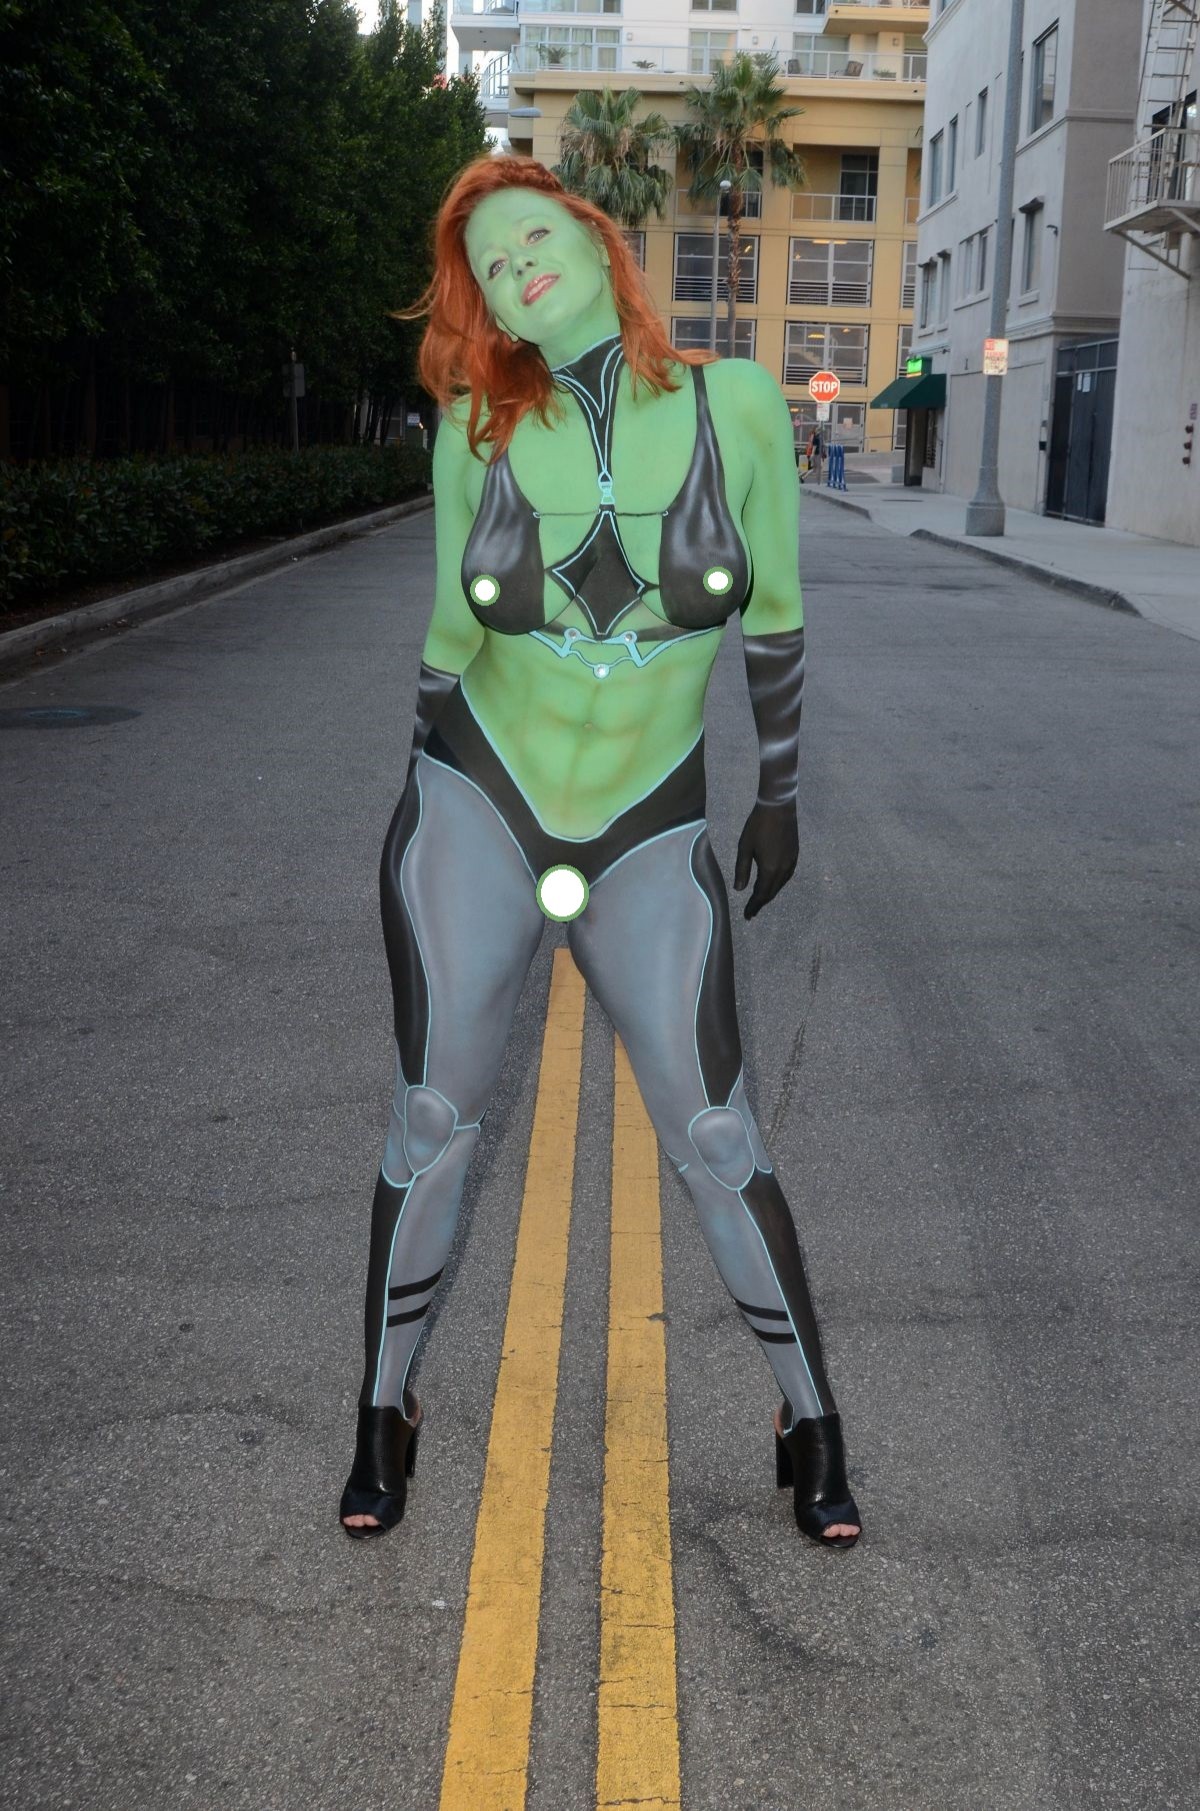 maitland-ward-in-cosplay-for-comic-con-in-san-diego-07-21-2017_4